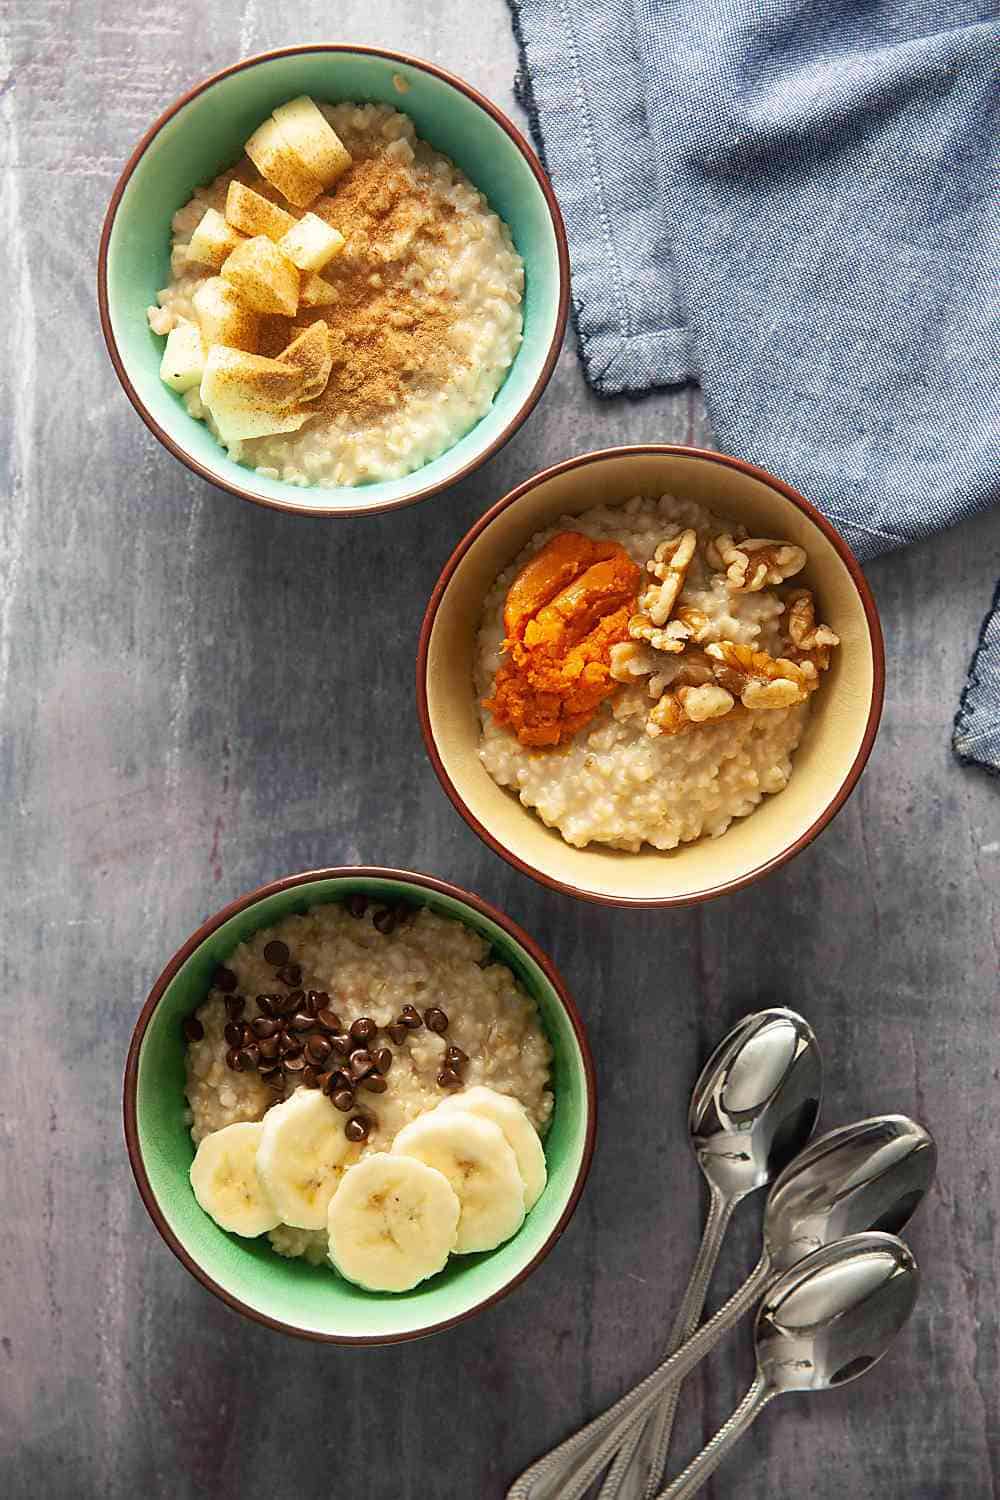 How to Make Instant Pot Steel Cut Oats (Video!)